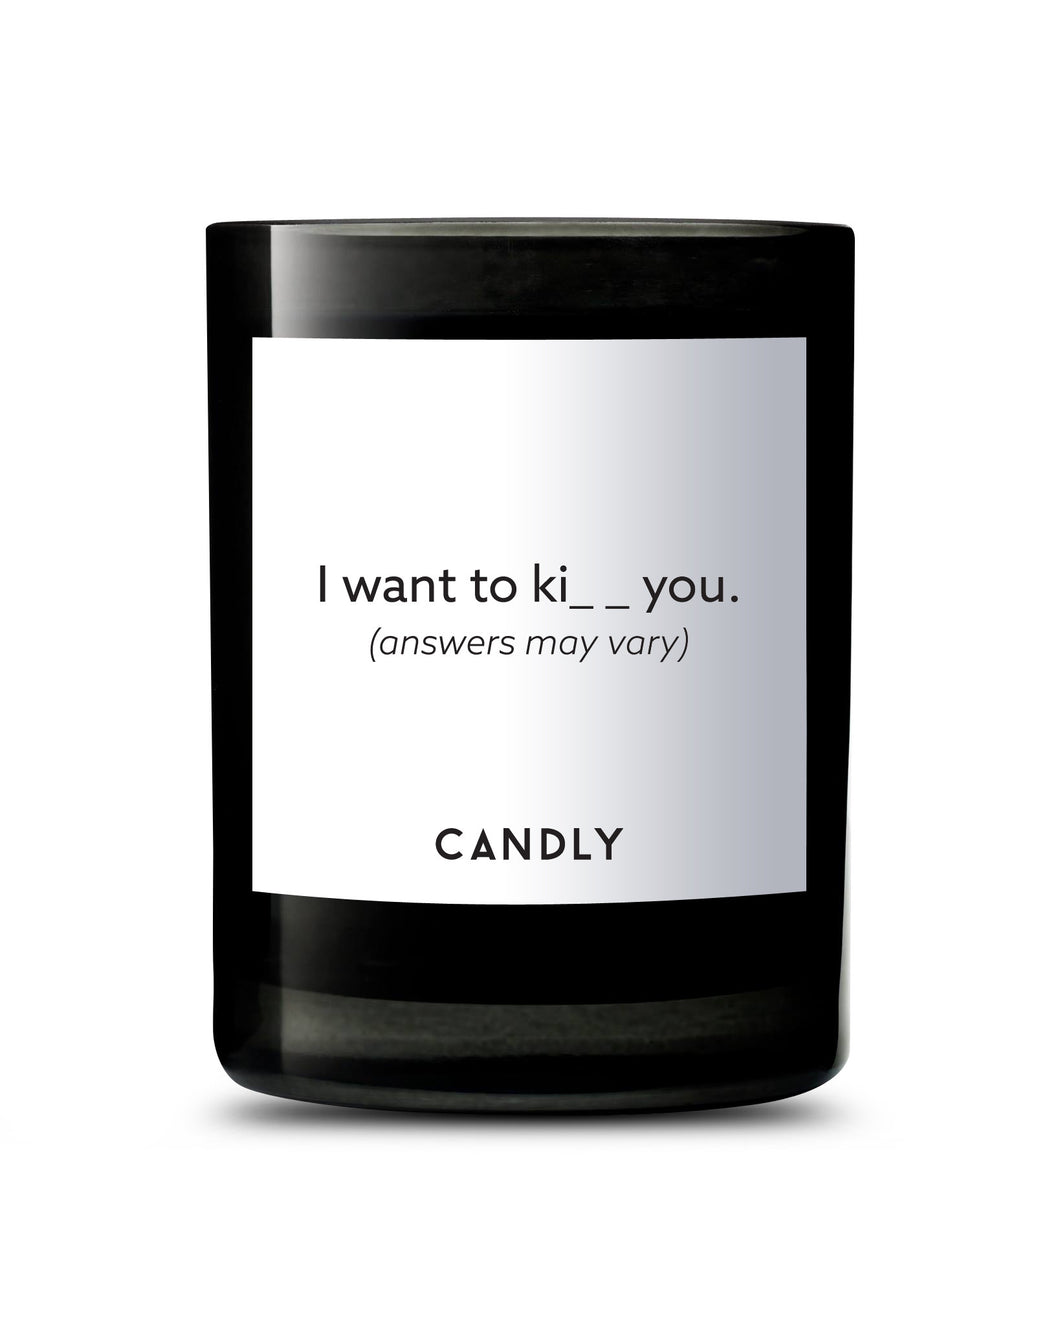 The Kiss Candle?